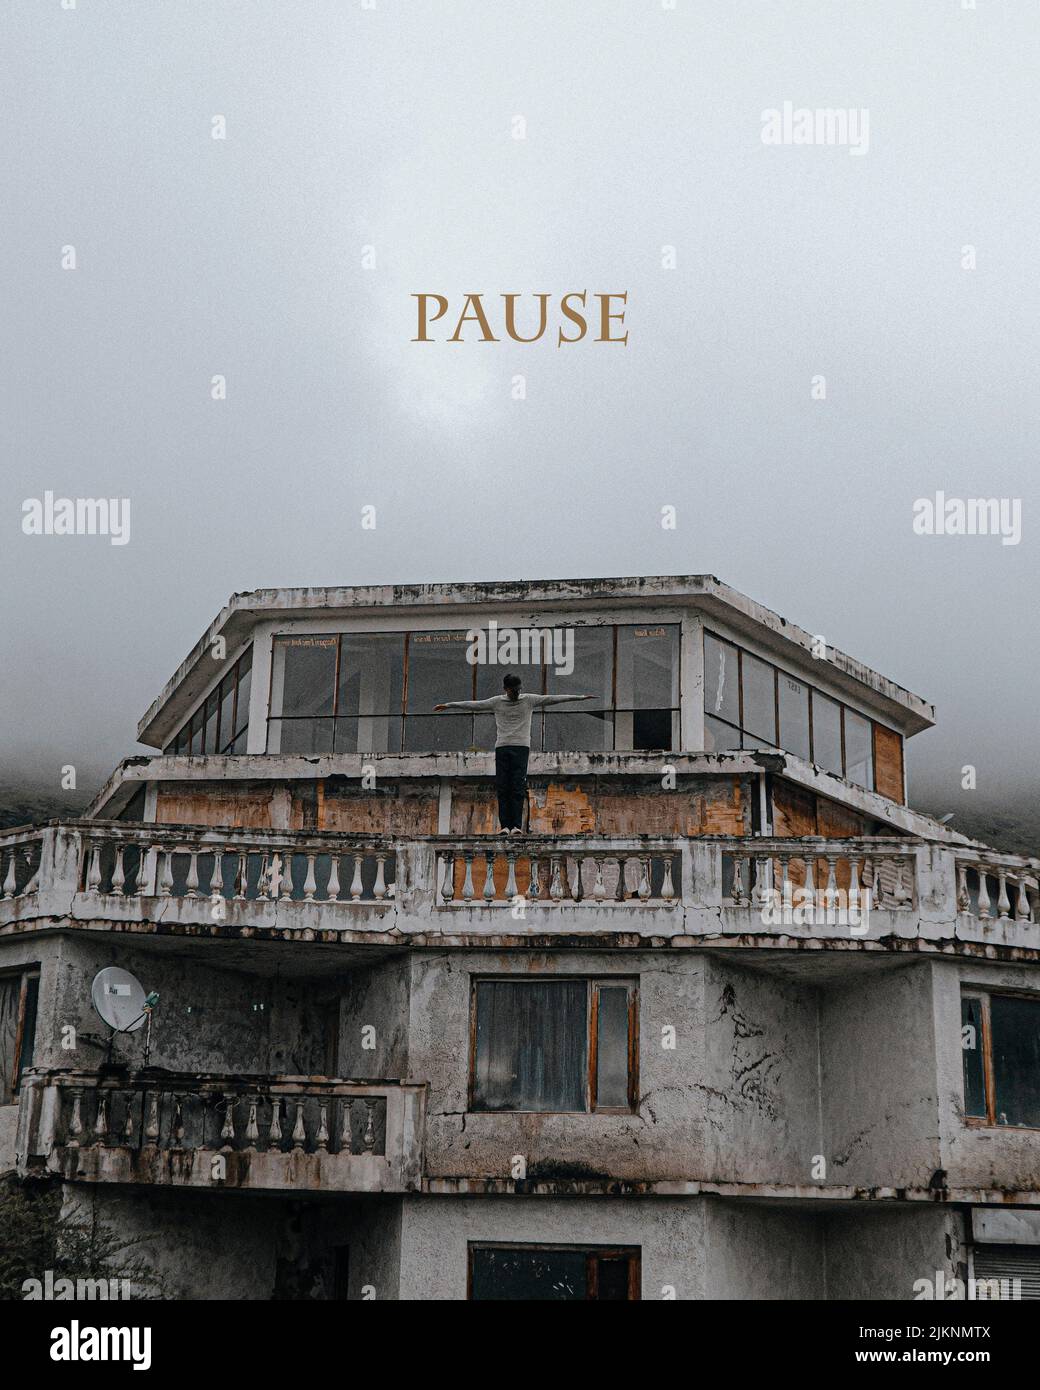 A vertical shot of a person on the abandoned building with a pause sign over it Stock Photo